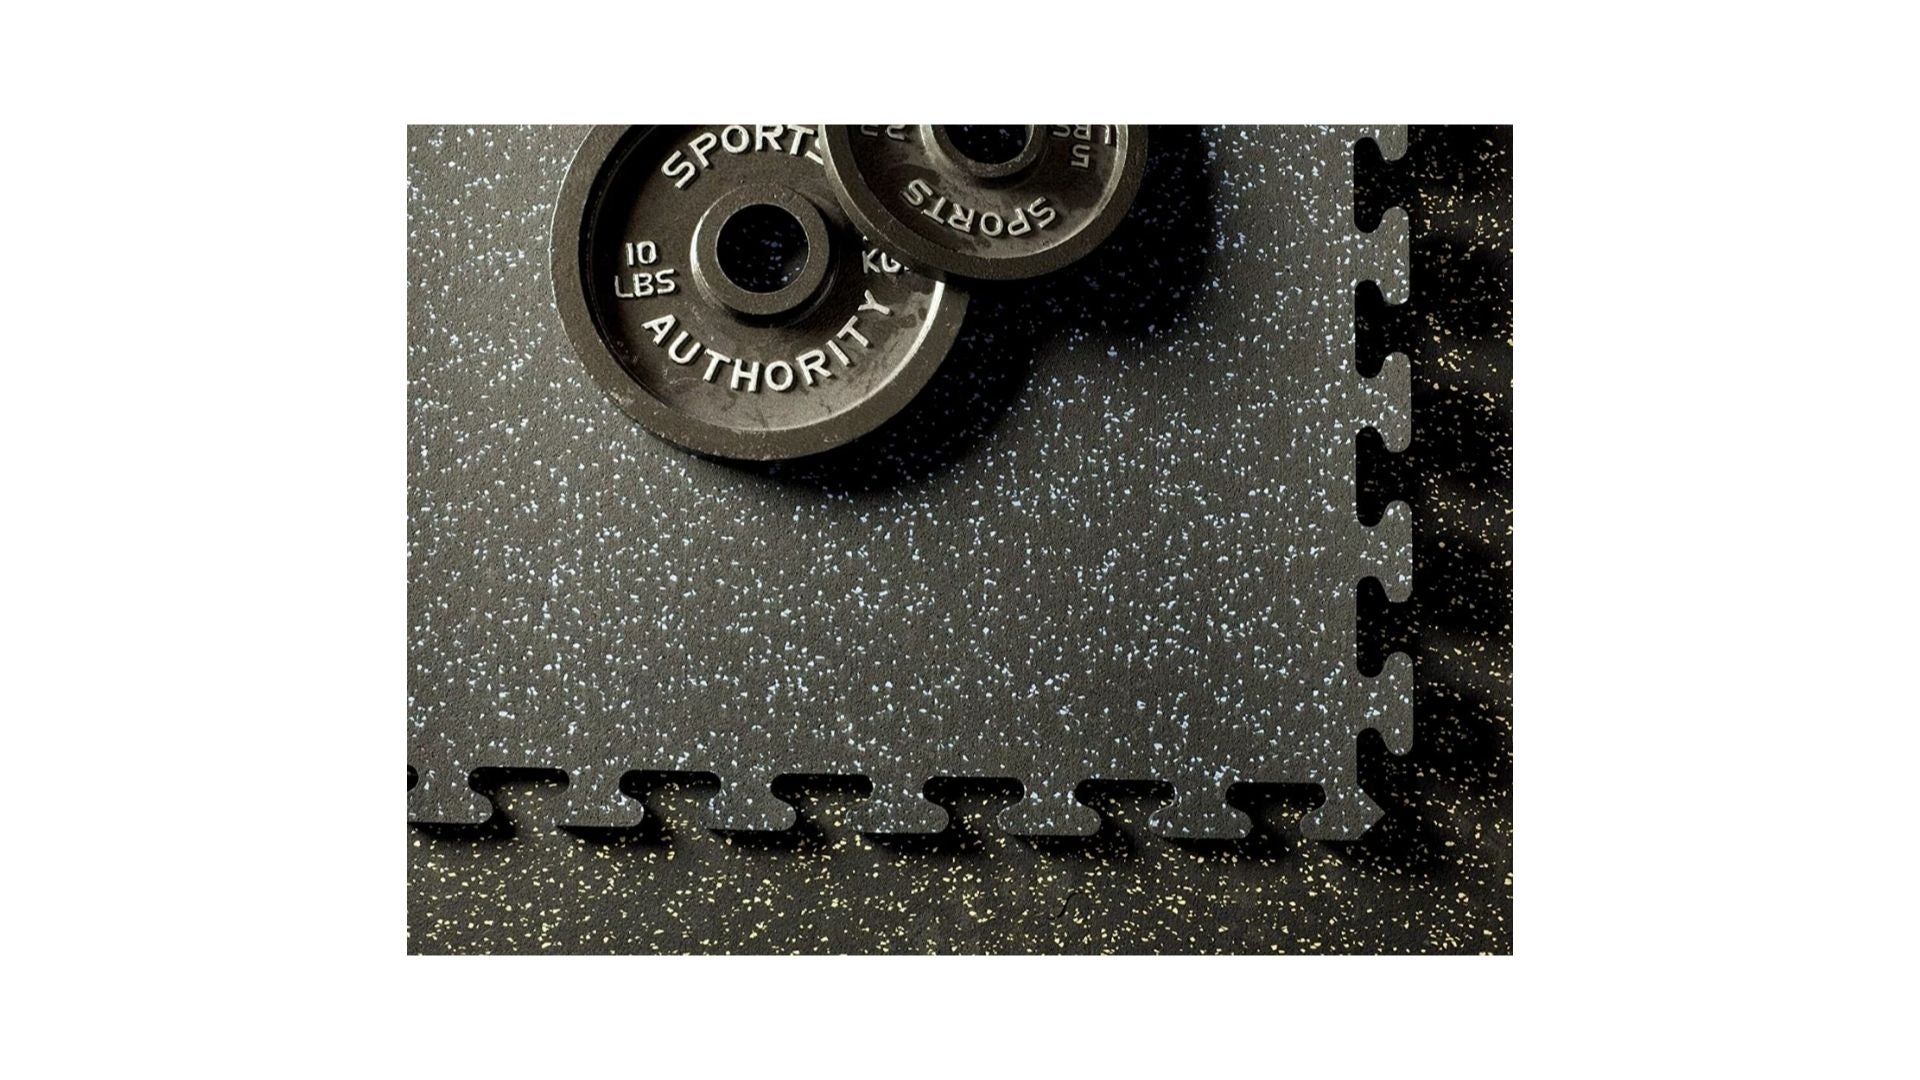 Best Home Gym Flooring (Review & Buying Guide) in 2023 - Task